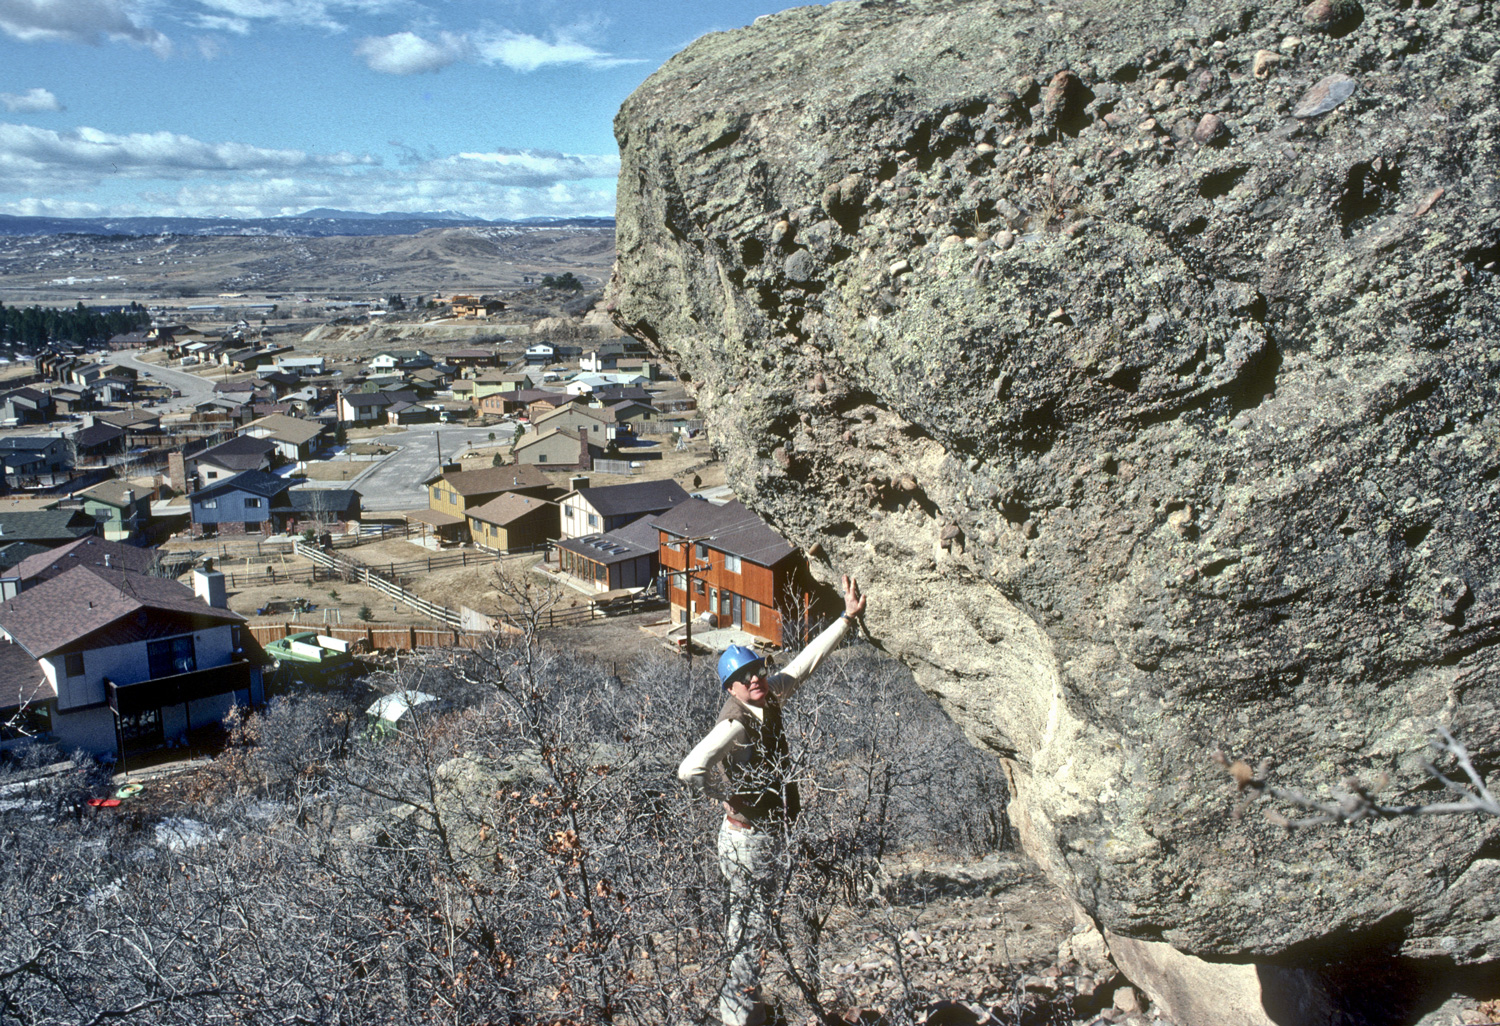 A close-up showing the scale of one of the blocks of Castle Rock Conglomerate that is already displaced, Castle Rock, Colorado, January 1981. Photo credit: Colorado Geological Survey.